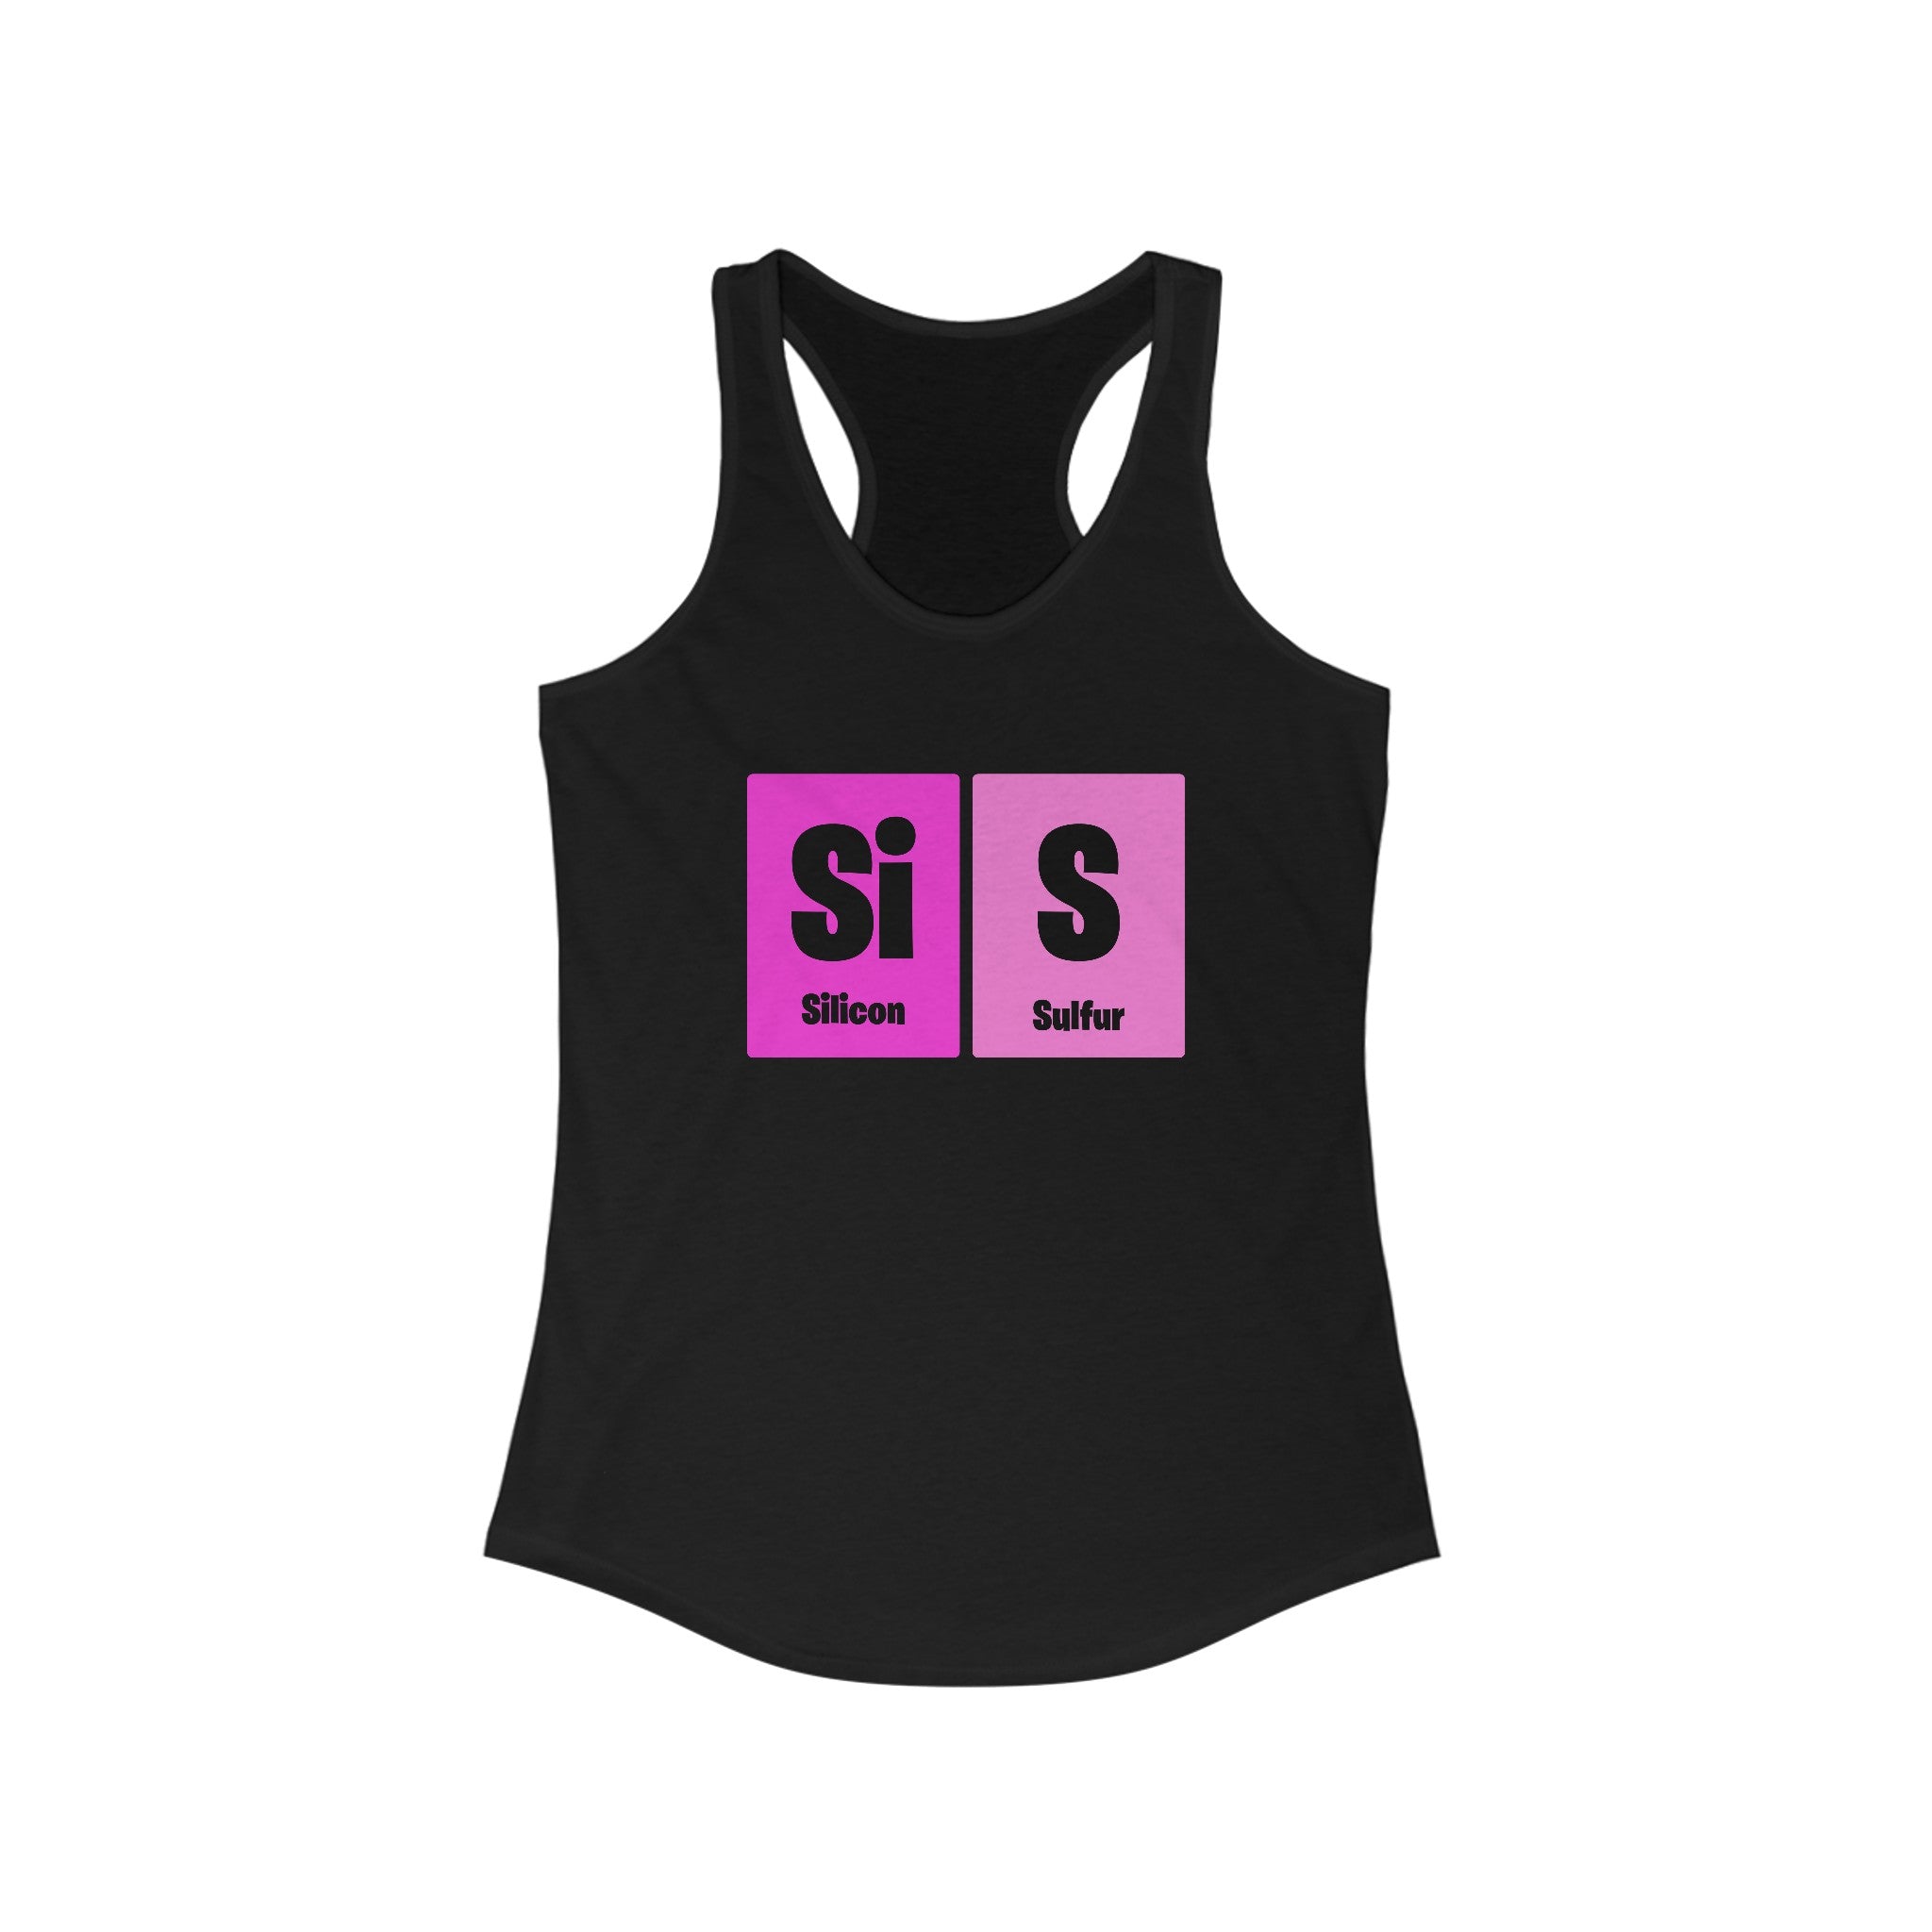 This Si-S Light Pendant - Women's Racerback Tank is perfect for an active lifestyle, featuring periodic table elements Silicon (Si) and Sulfur (S) with a gradient pink background.